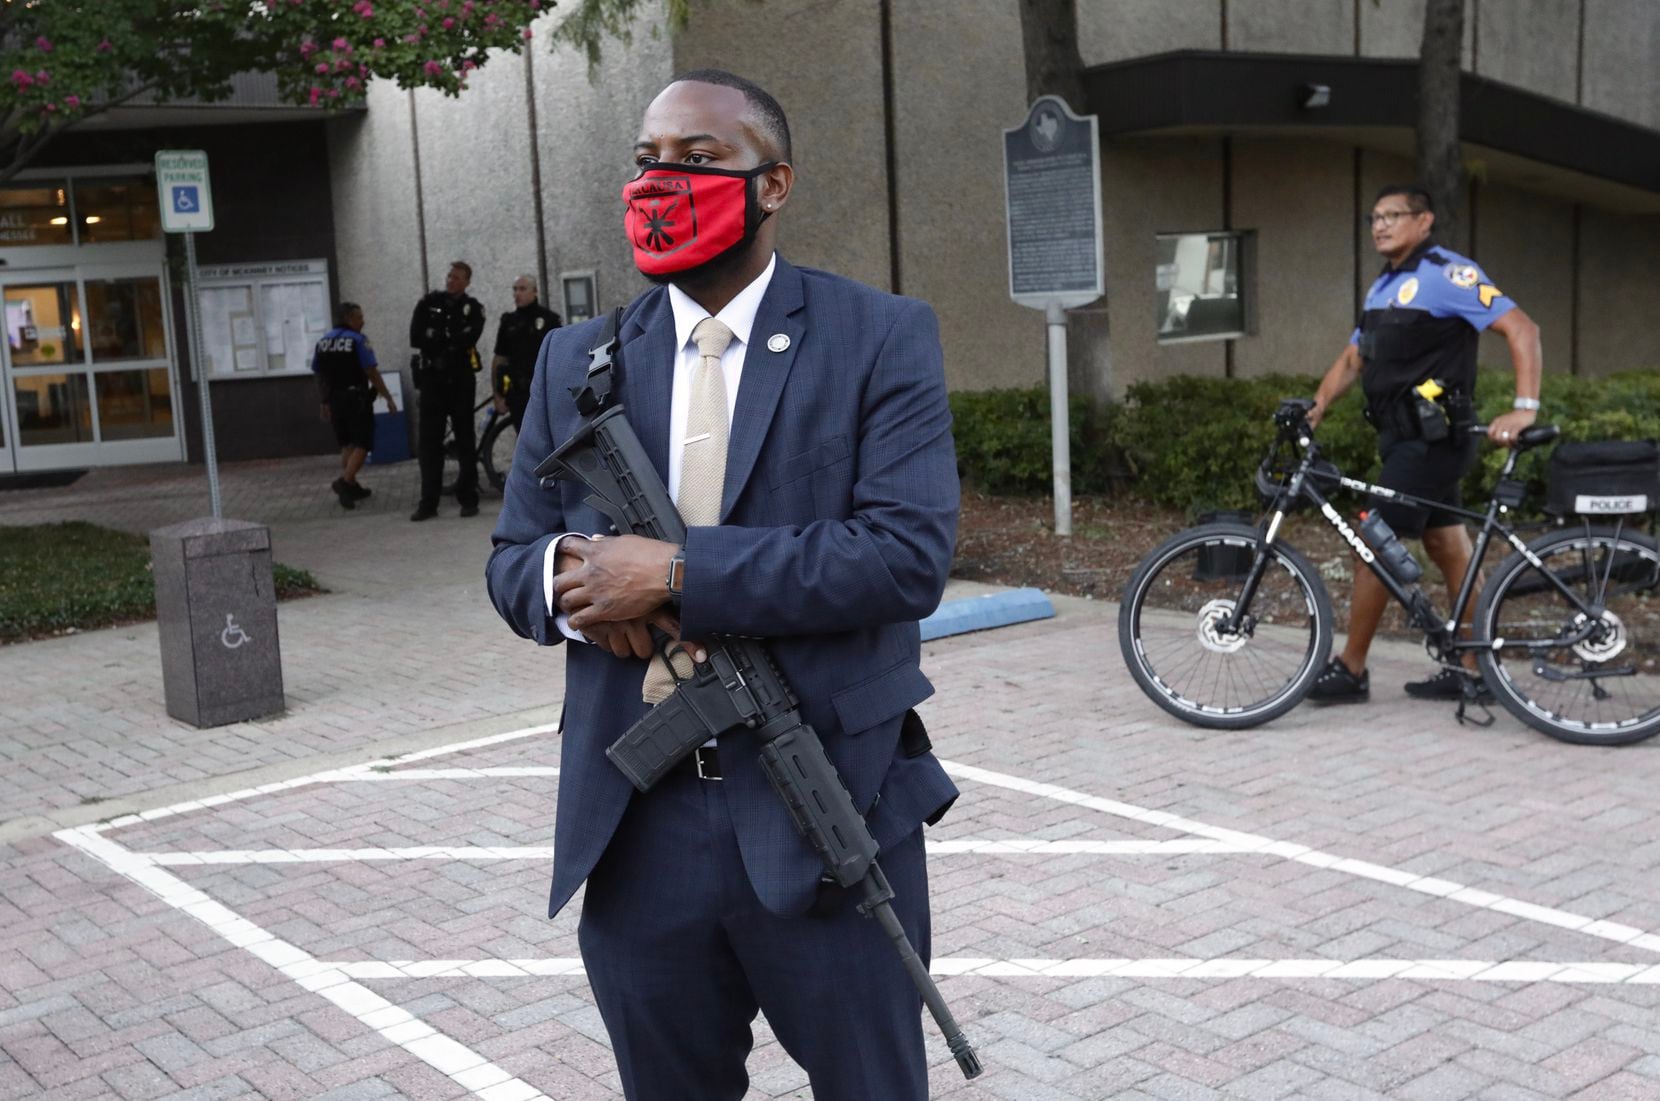 McKinney City Council member La'Shadion Shemwell brought his own weapon to City Hall on...